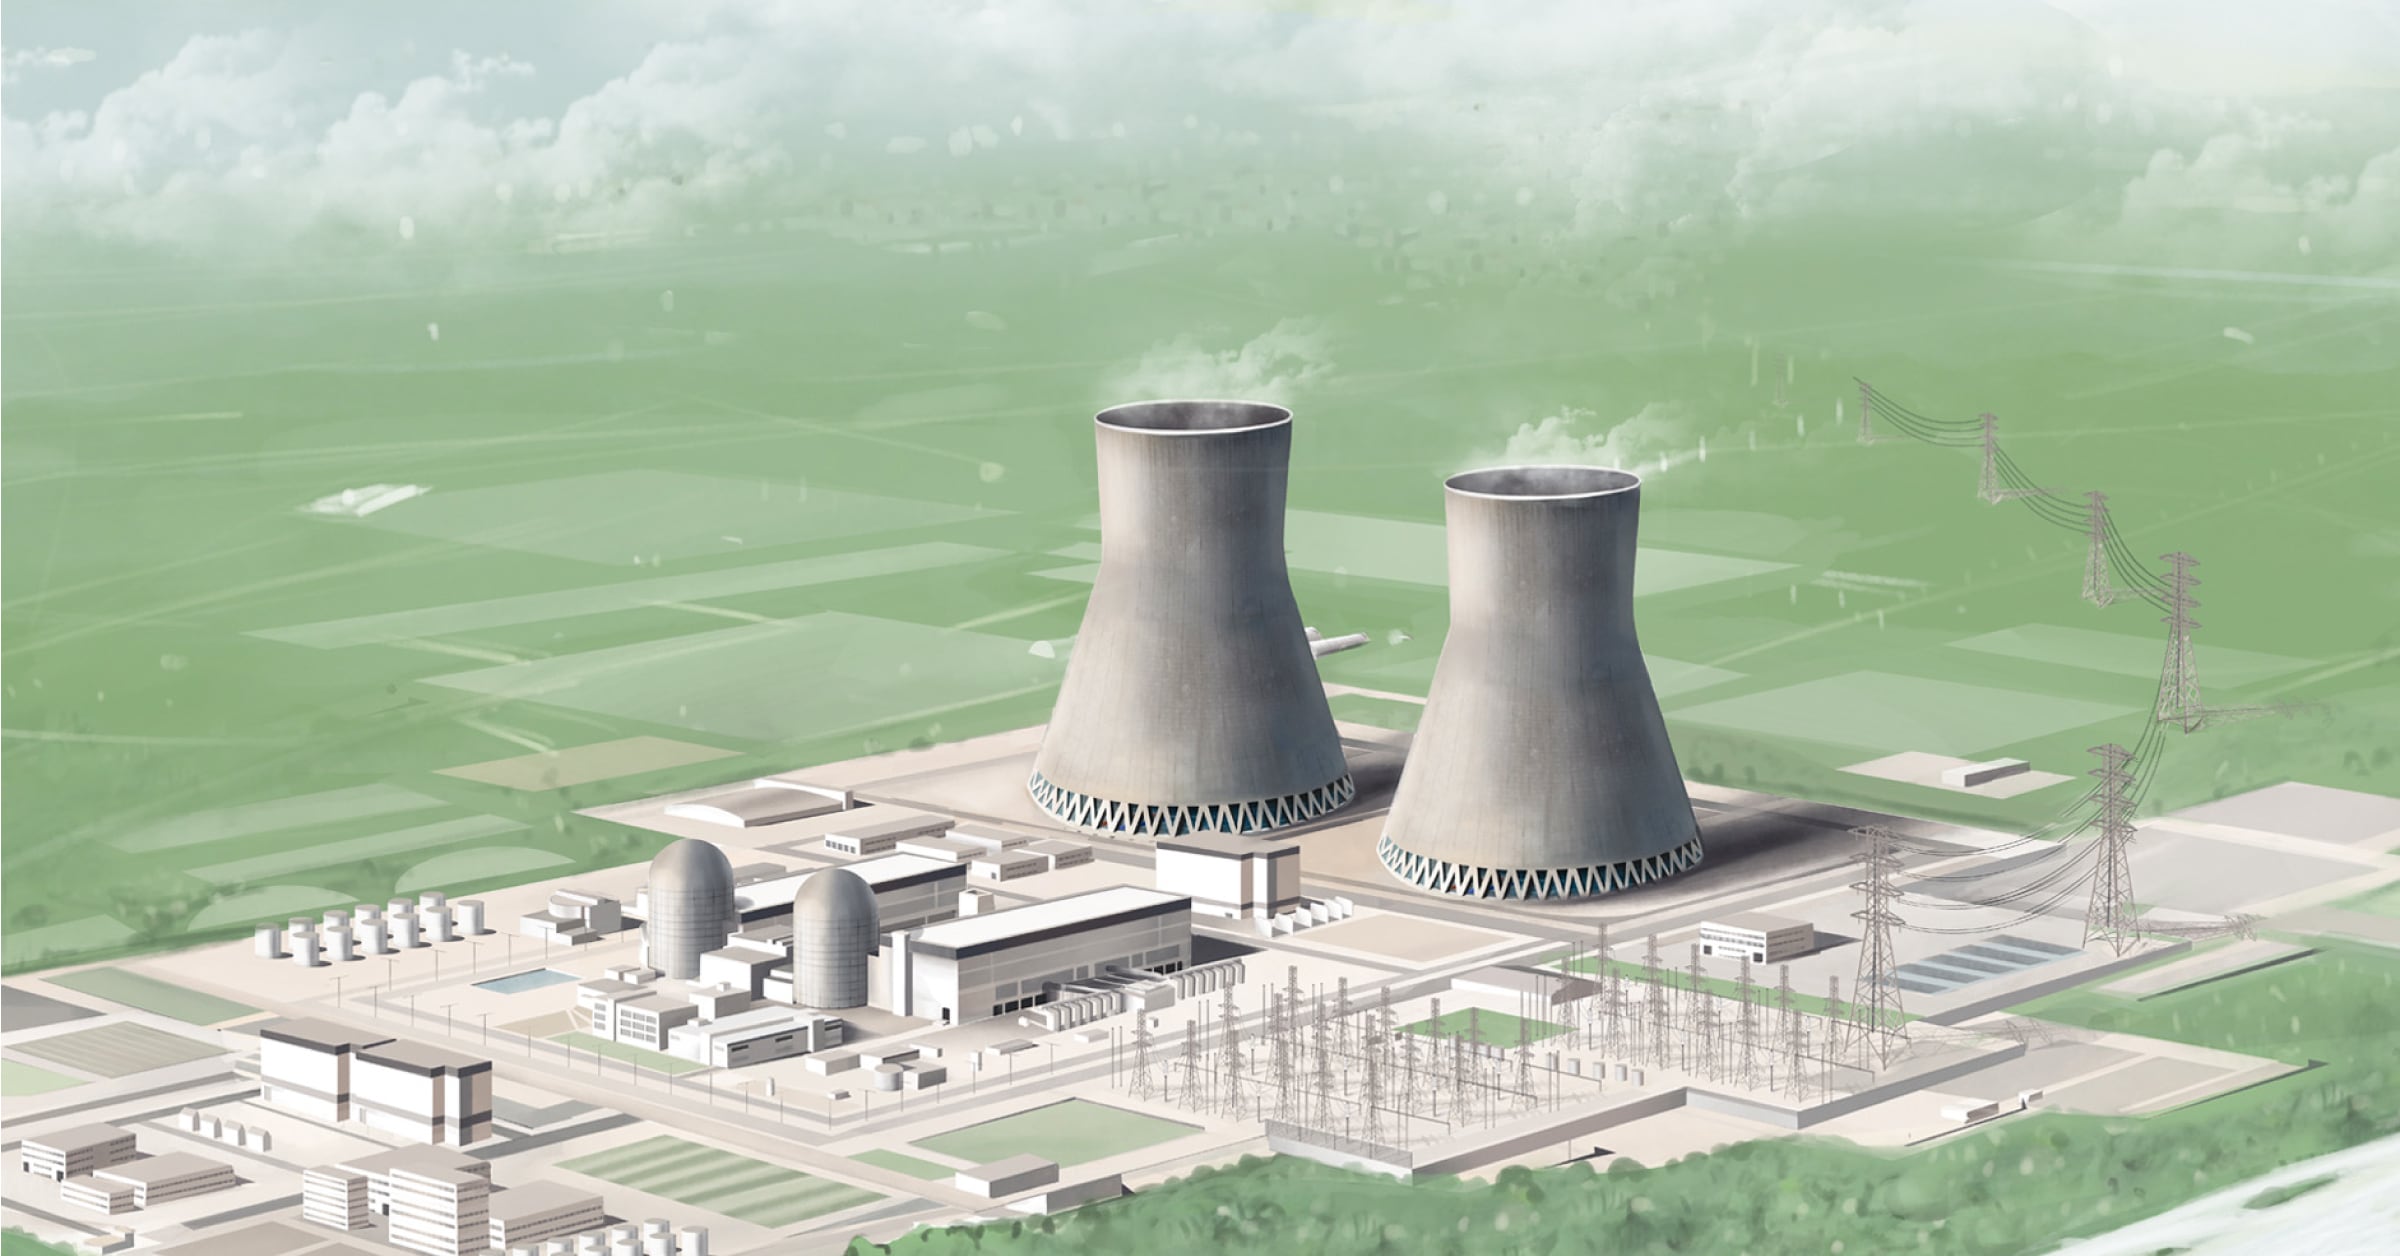 Europe's nuclear reactors are getting old